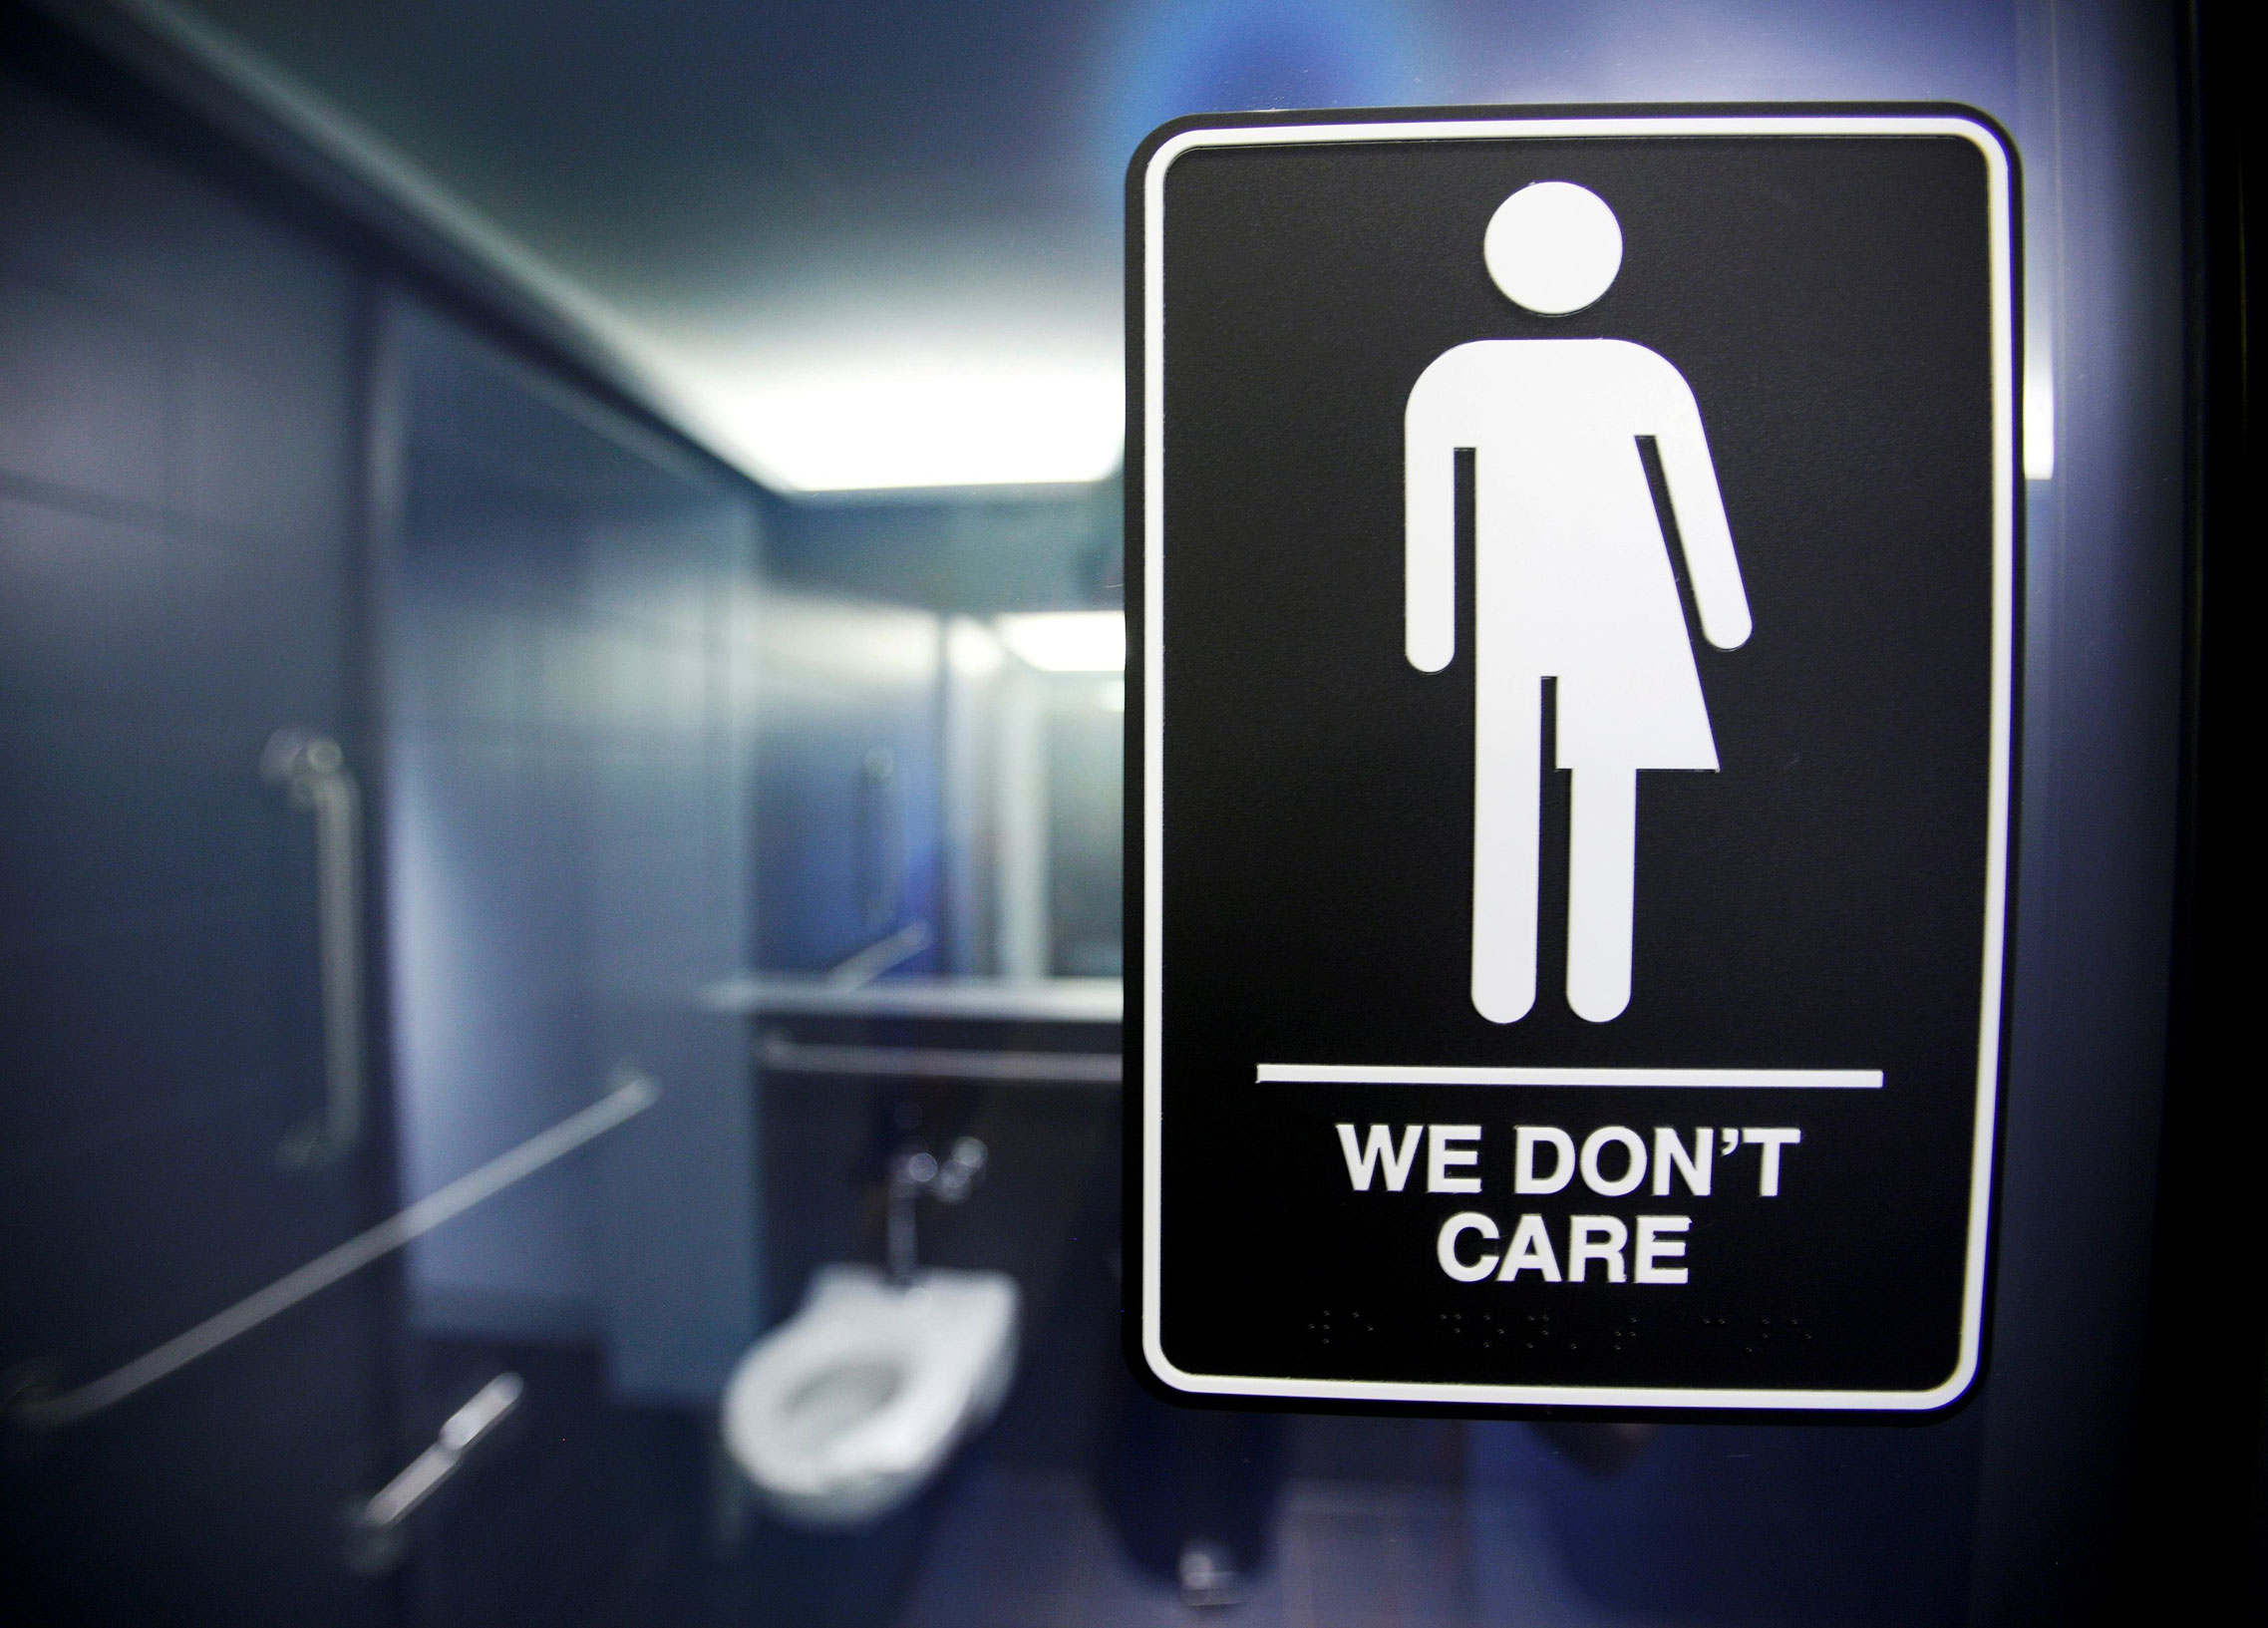 Neutral bathroom signs in public facilities indicate to patrons they are free to pee, regardless of their gender (Jonathan Drake—Reuters)